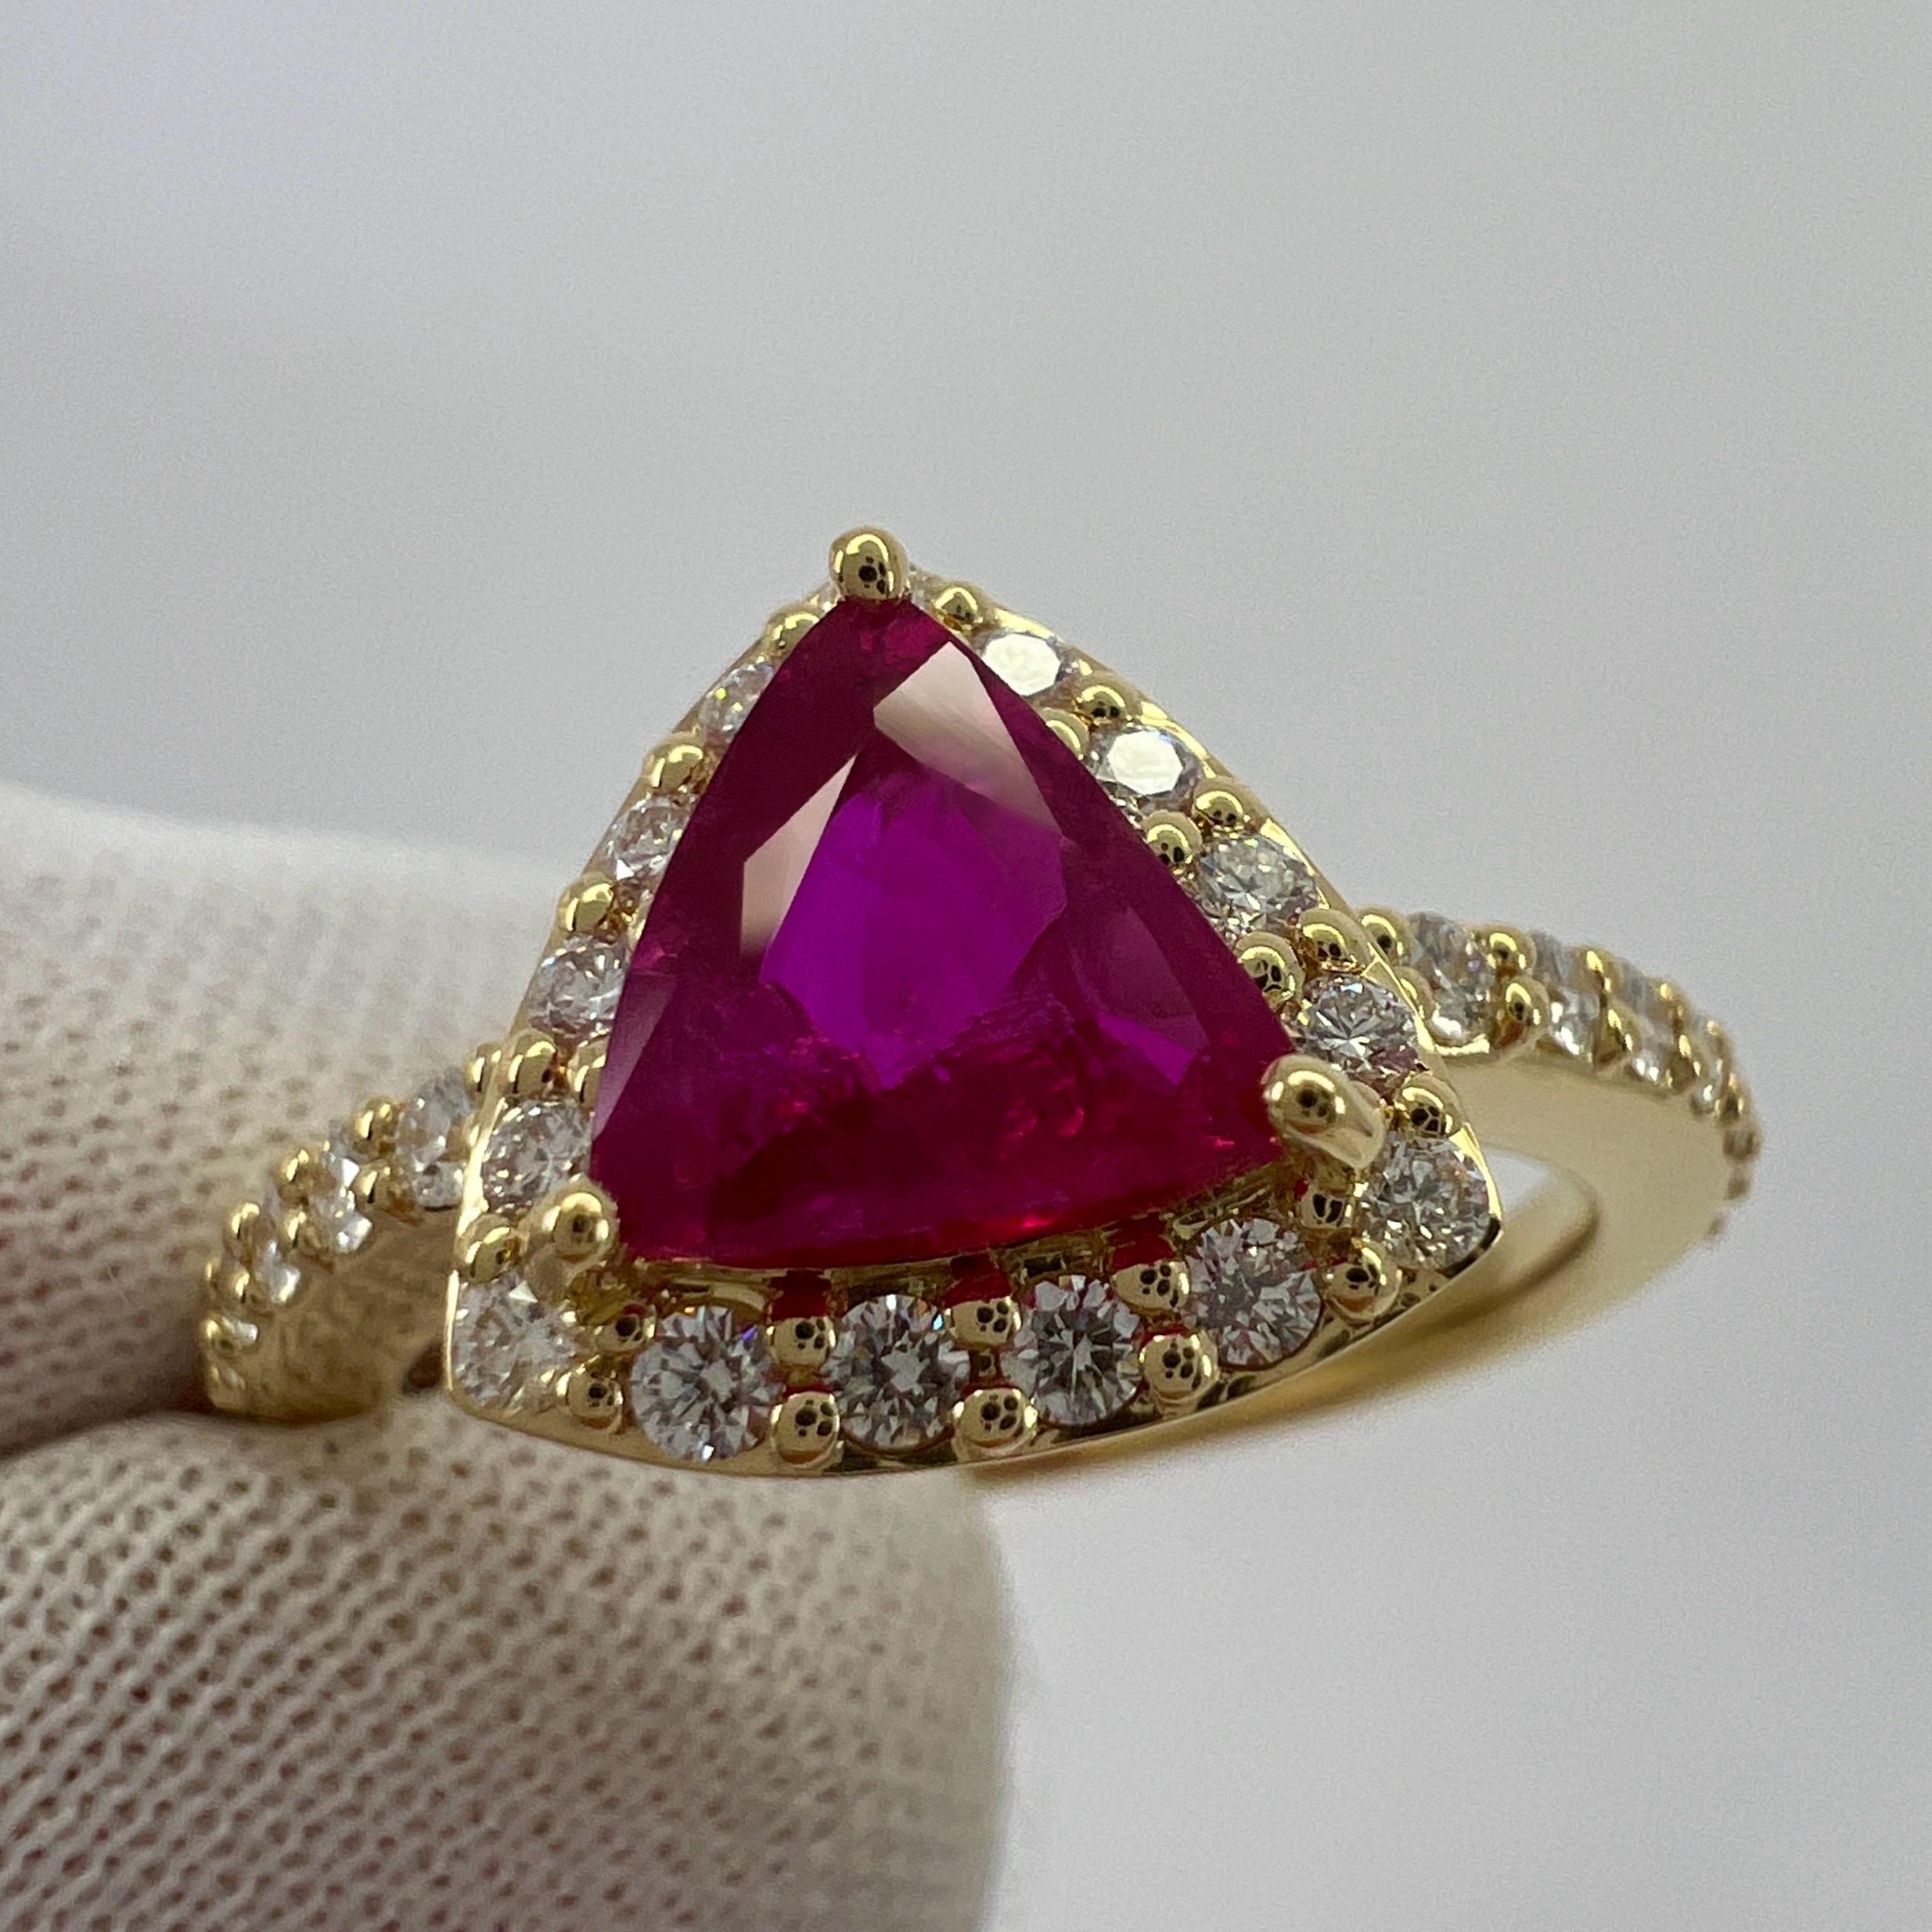 Natural Vivid Pinkish Red Untreated Ruby & Diamond 18k Yellow Gold Triangle Cut Cluster Halo Ring.

1.02 Carat vivid pinkish red triangle cut unheated natural ruby set in a finely made 18k yellow gold cluster ring. 
This ruby has a beautiful vivid